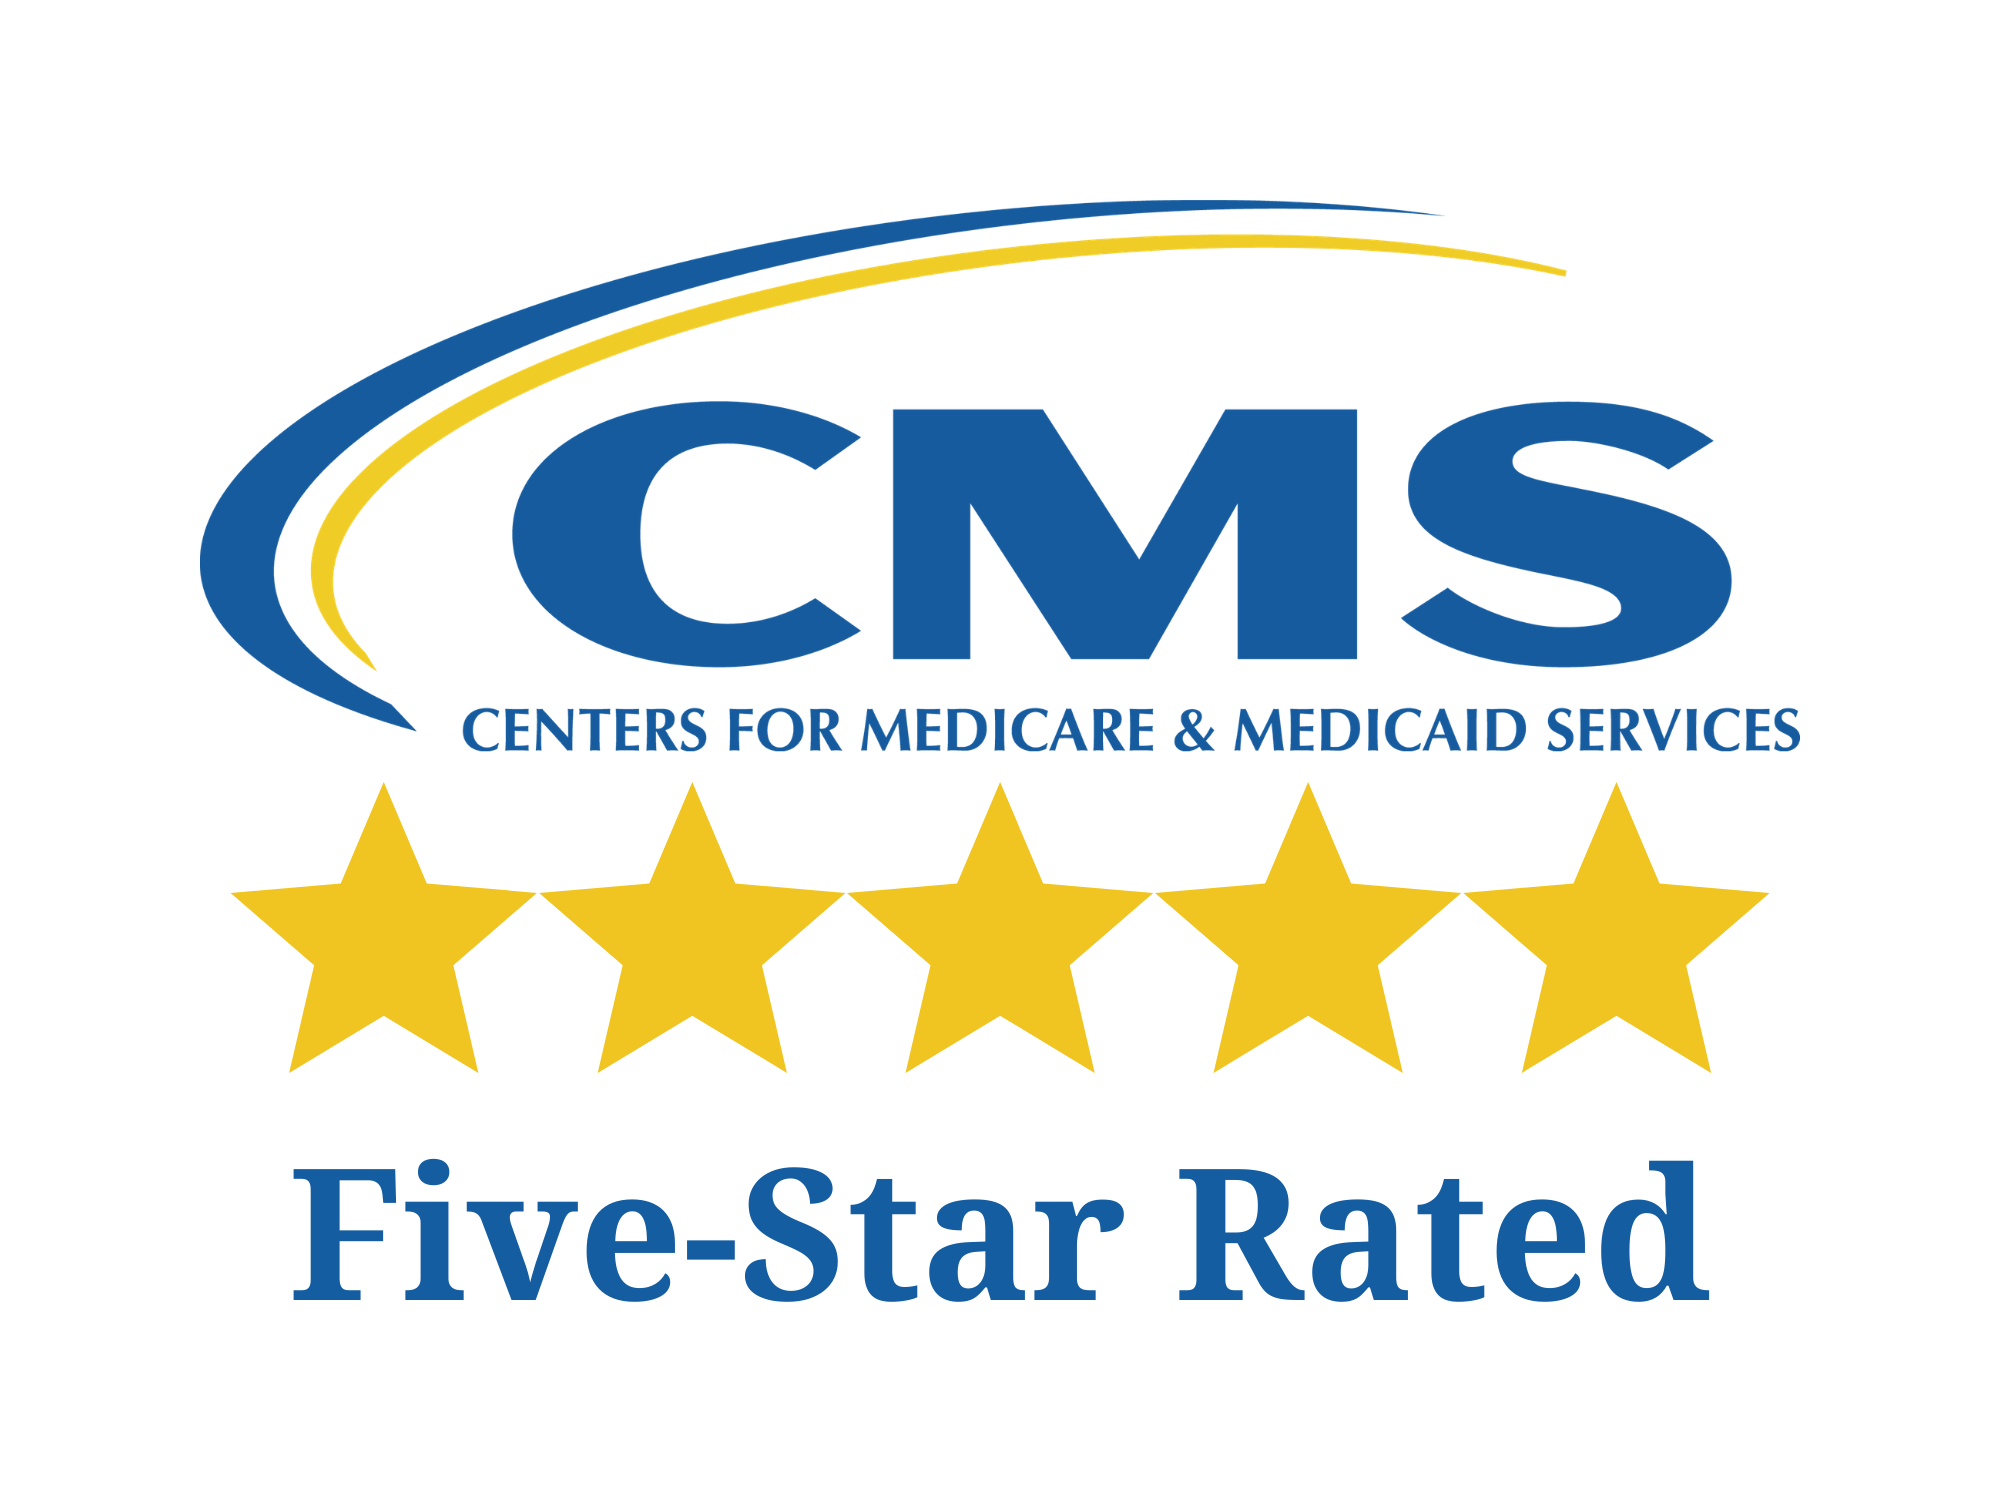 St. Margaret Hall has been awarded the CMS Five Star Rating